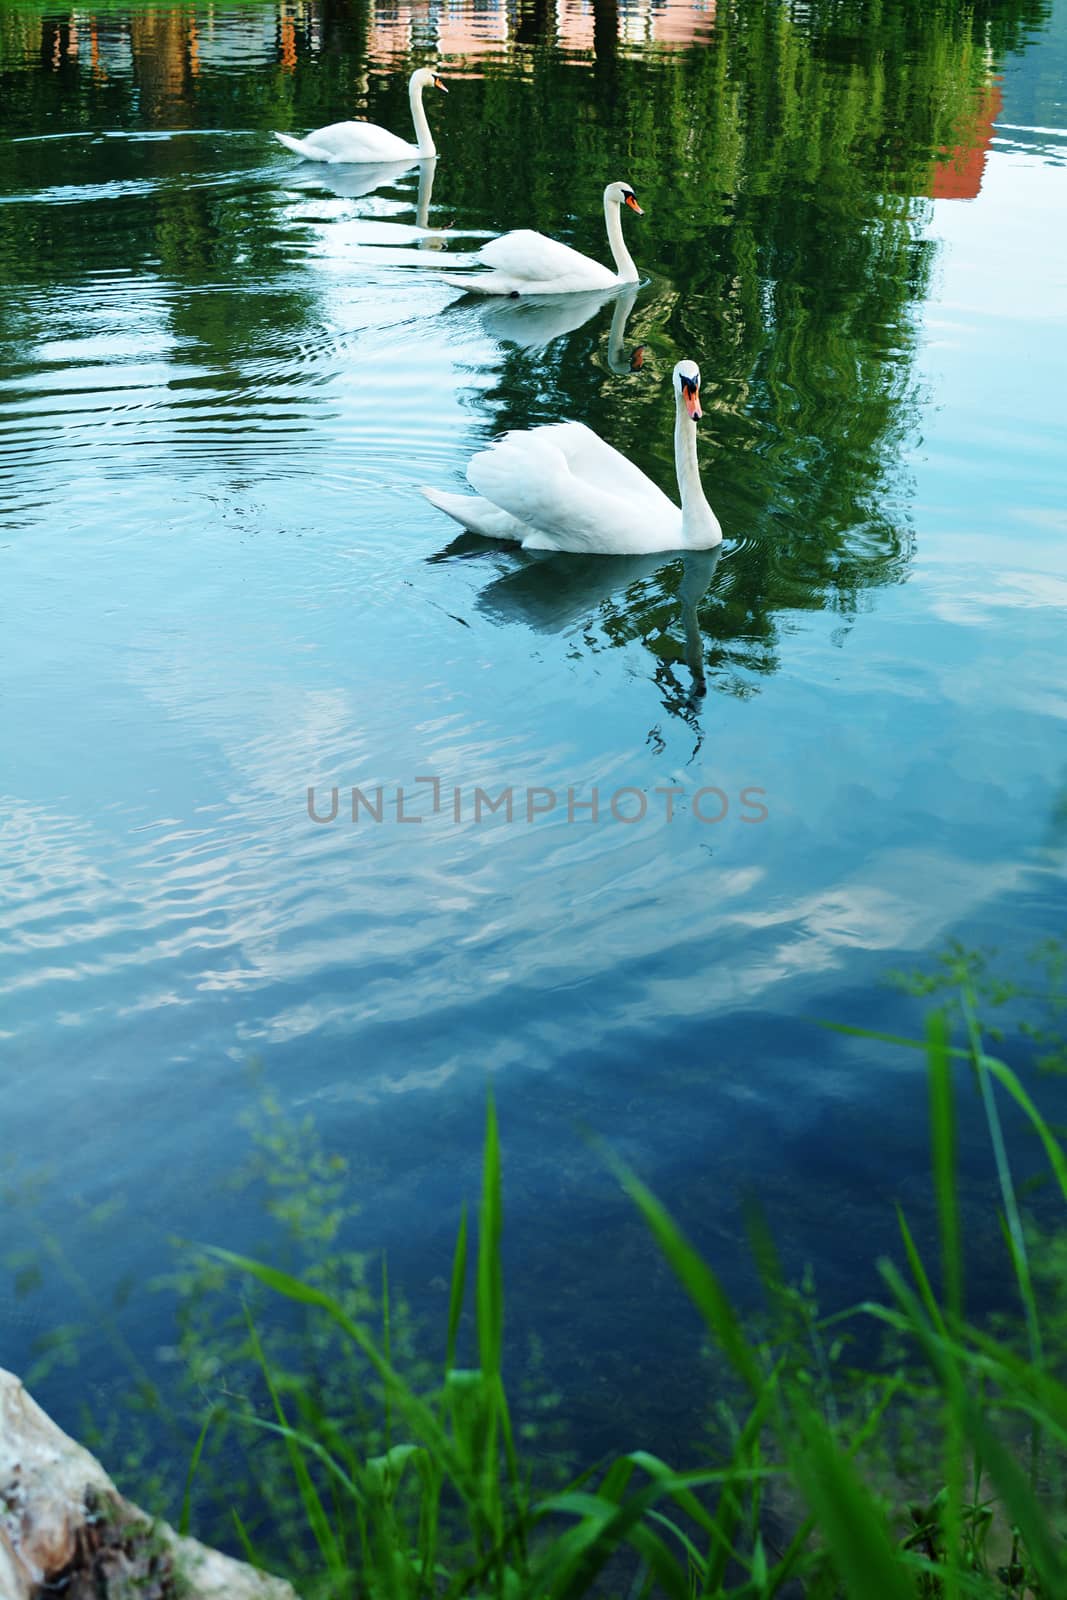 Group of swans by photosampler